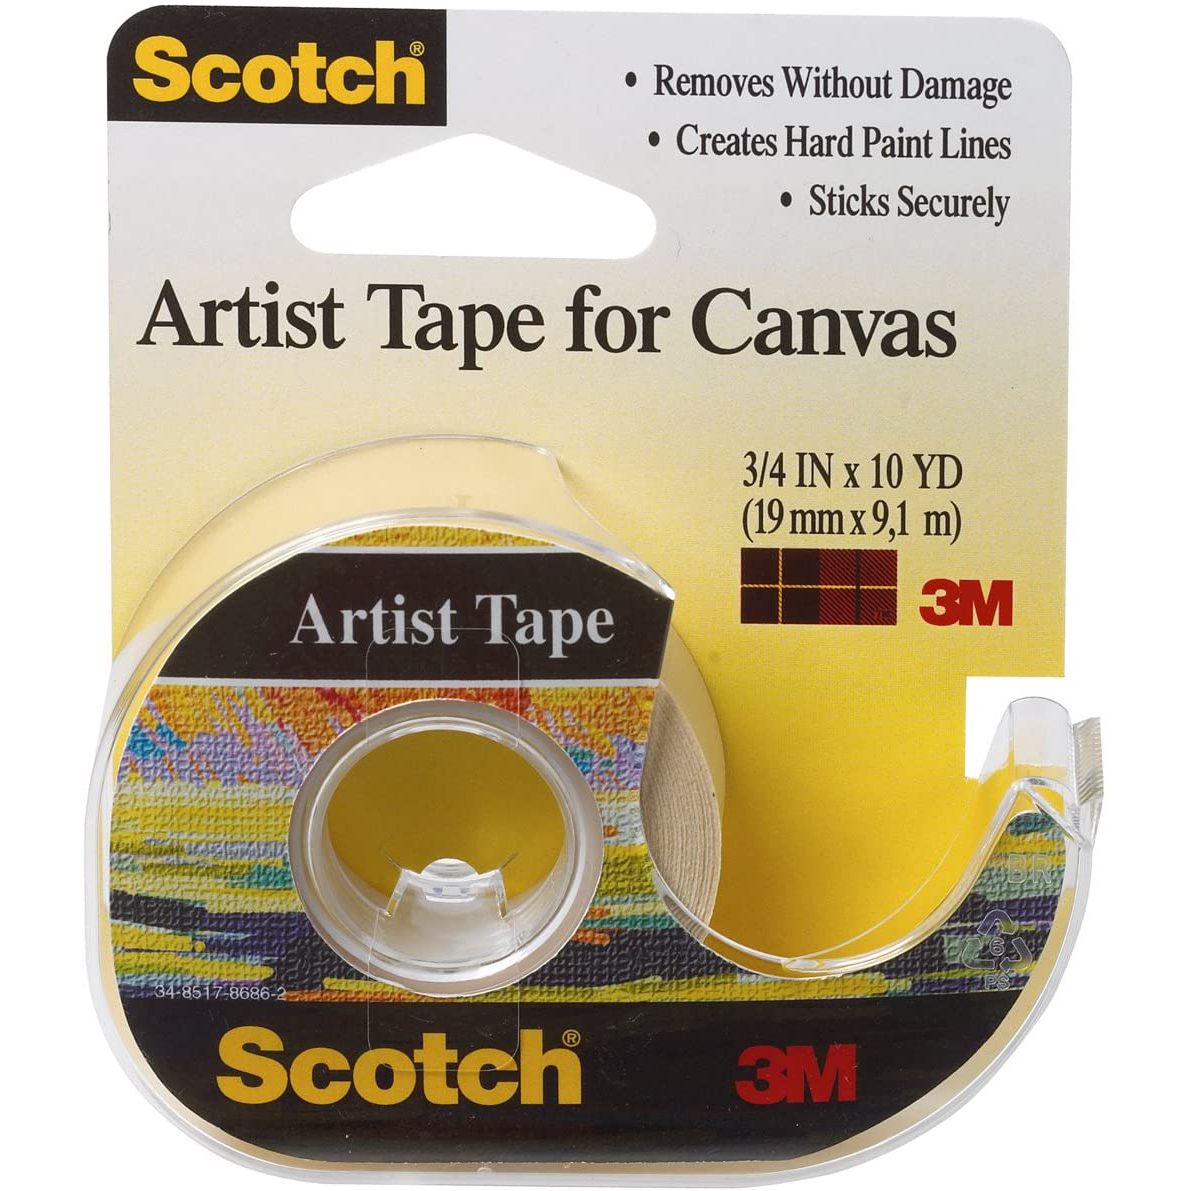 Scotch Artist Tape [Canvas, Low Tack or Curves]